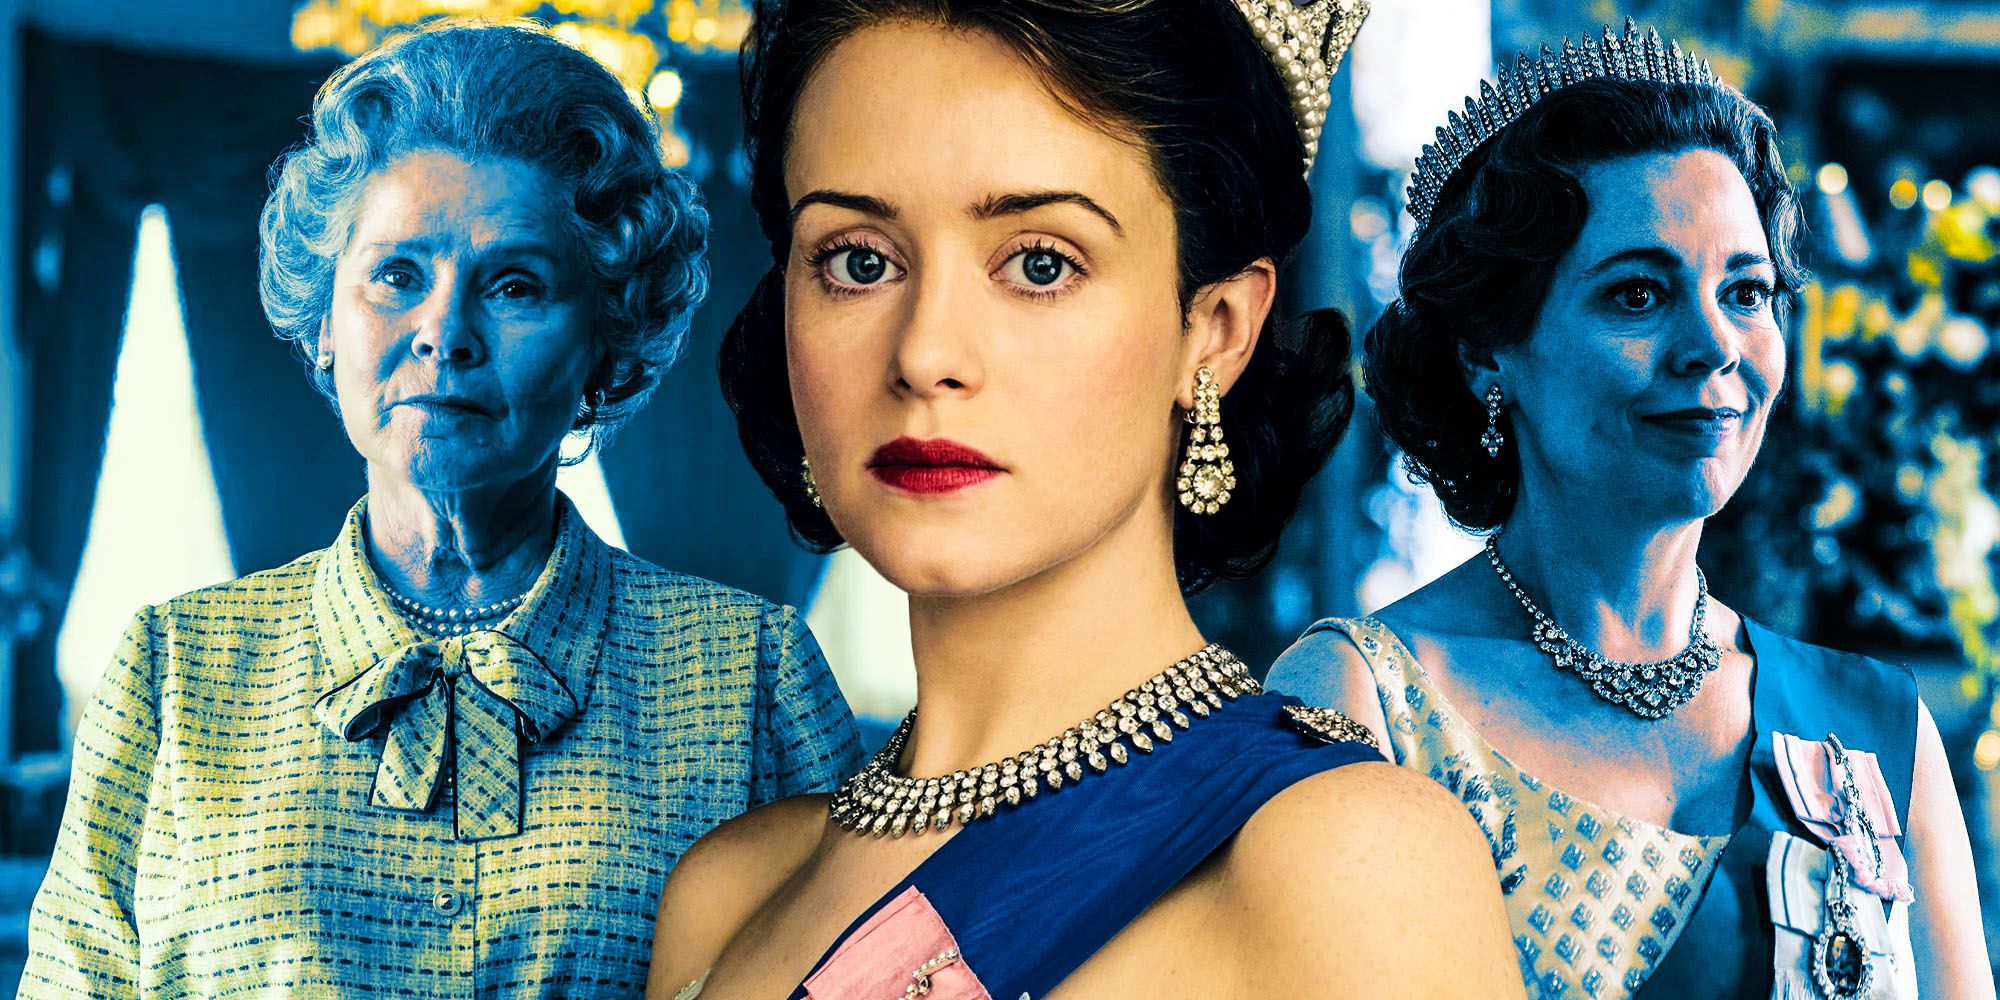 Claire Foy Plays Young Queen Elizabeth in Netflix's 'The Crown' – WWD